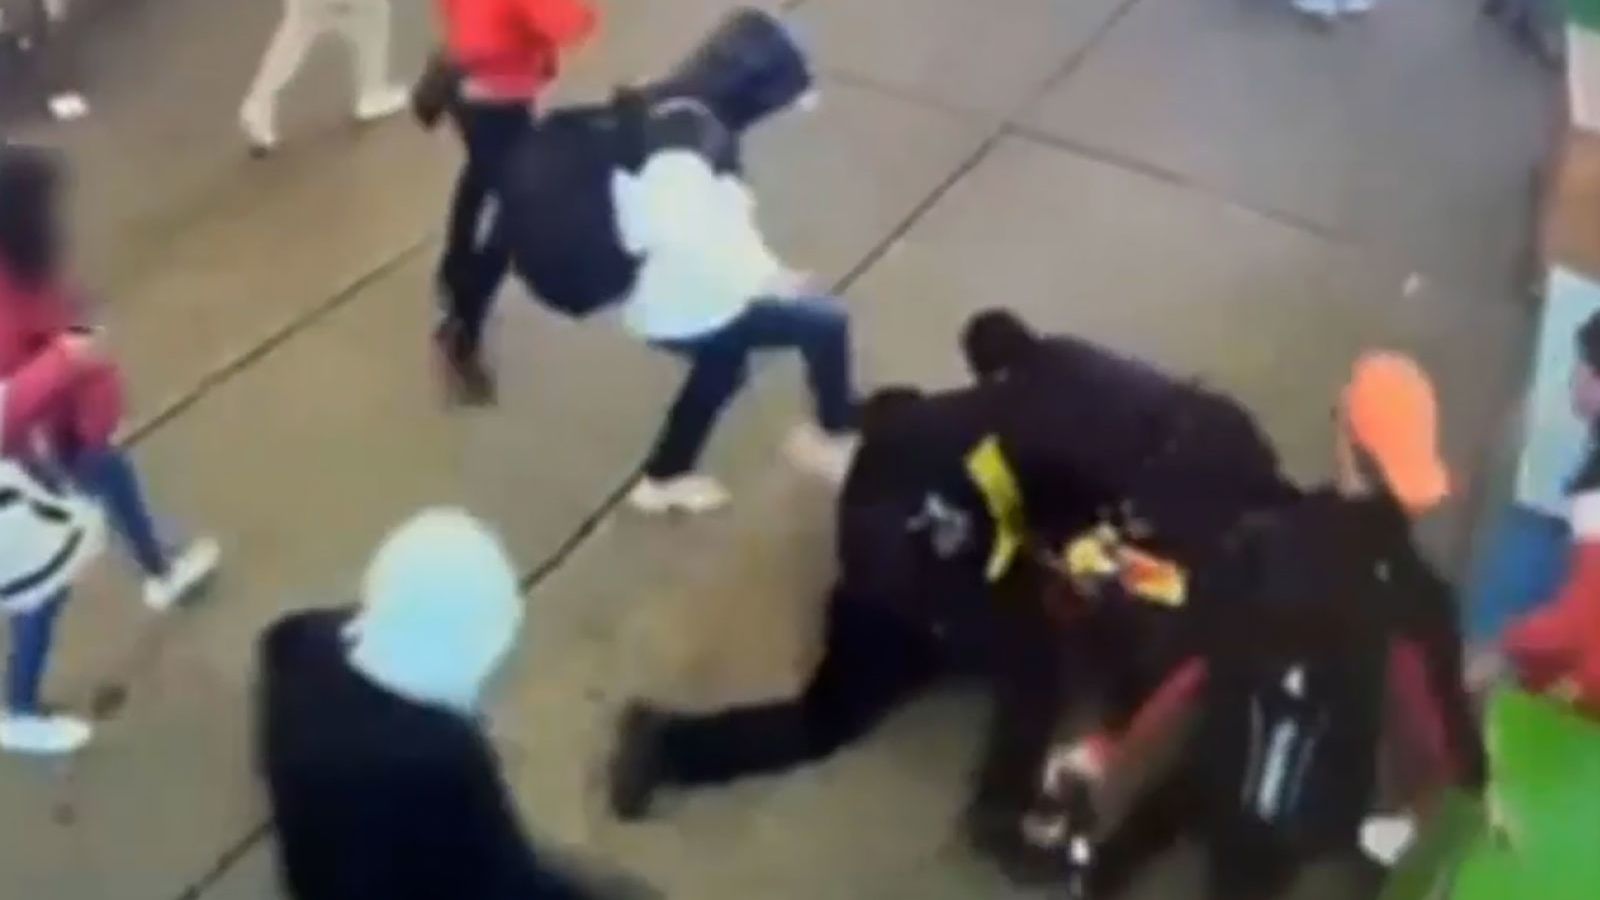 This screengrab from video from the New York Police Department shows a group of migrants assaulting two New York Police Department officers, with one officer on the ground repeatedly kicked and punched by the group of men after the officers attempted to break up a disorderly group near Times Square in the Saturday incident.